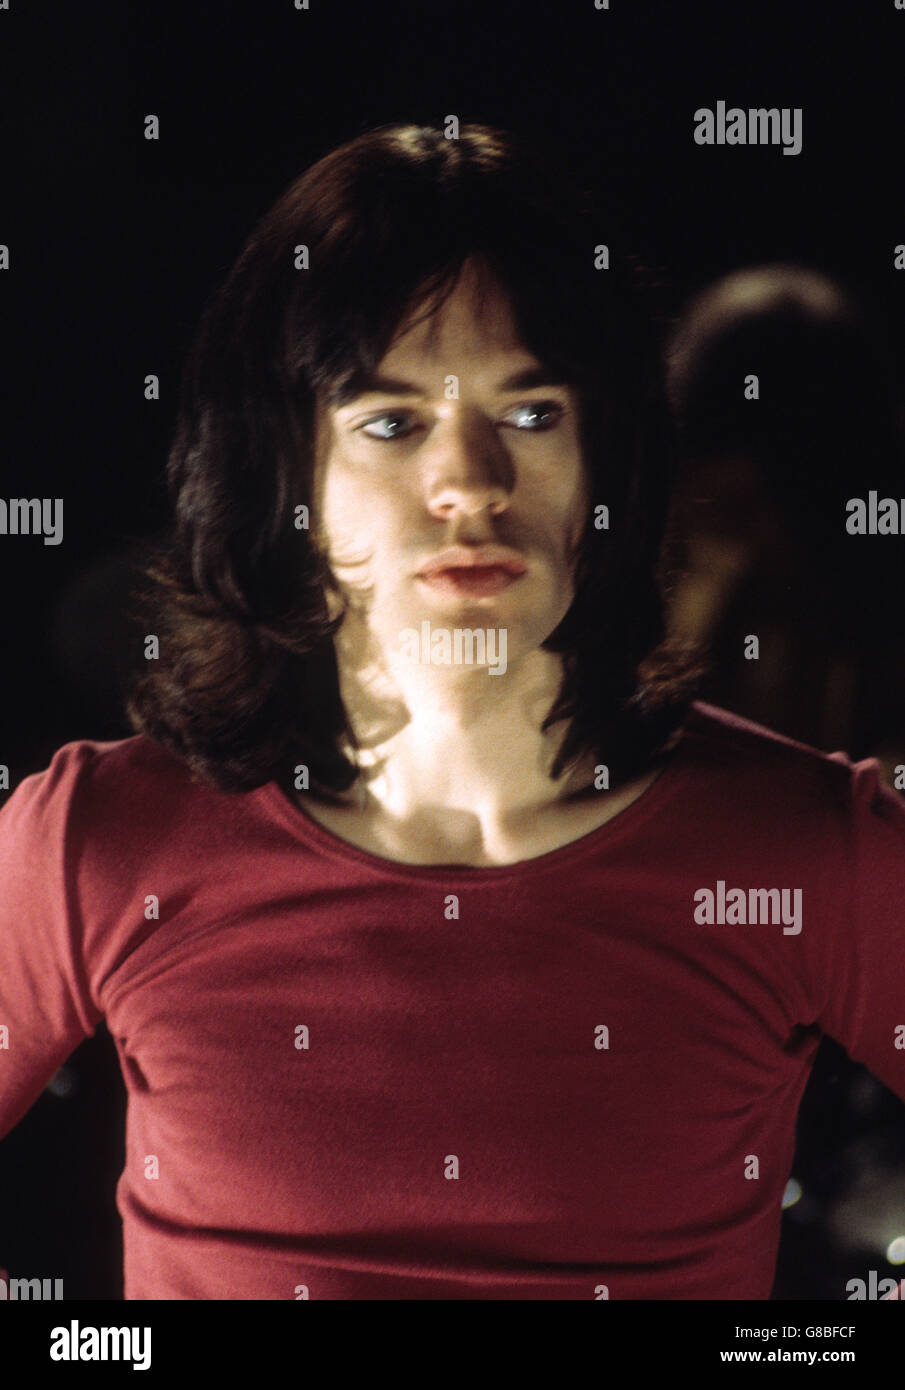 Mick Jagger, singer with the Rolling Stones, pictured as the band film at the LWT (London Weekend Television) studios in London. Stock Photo